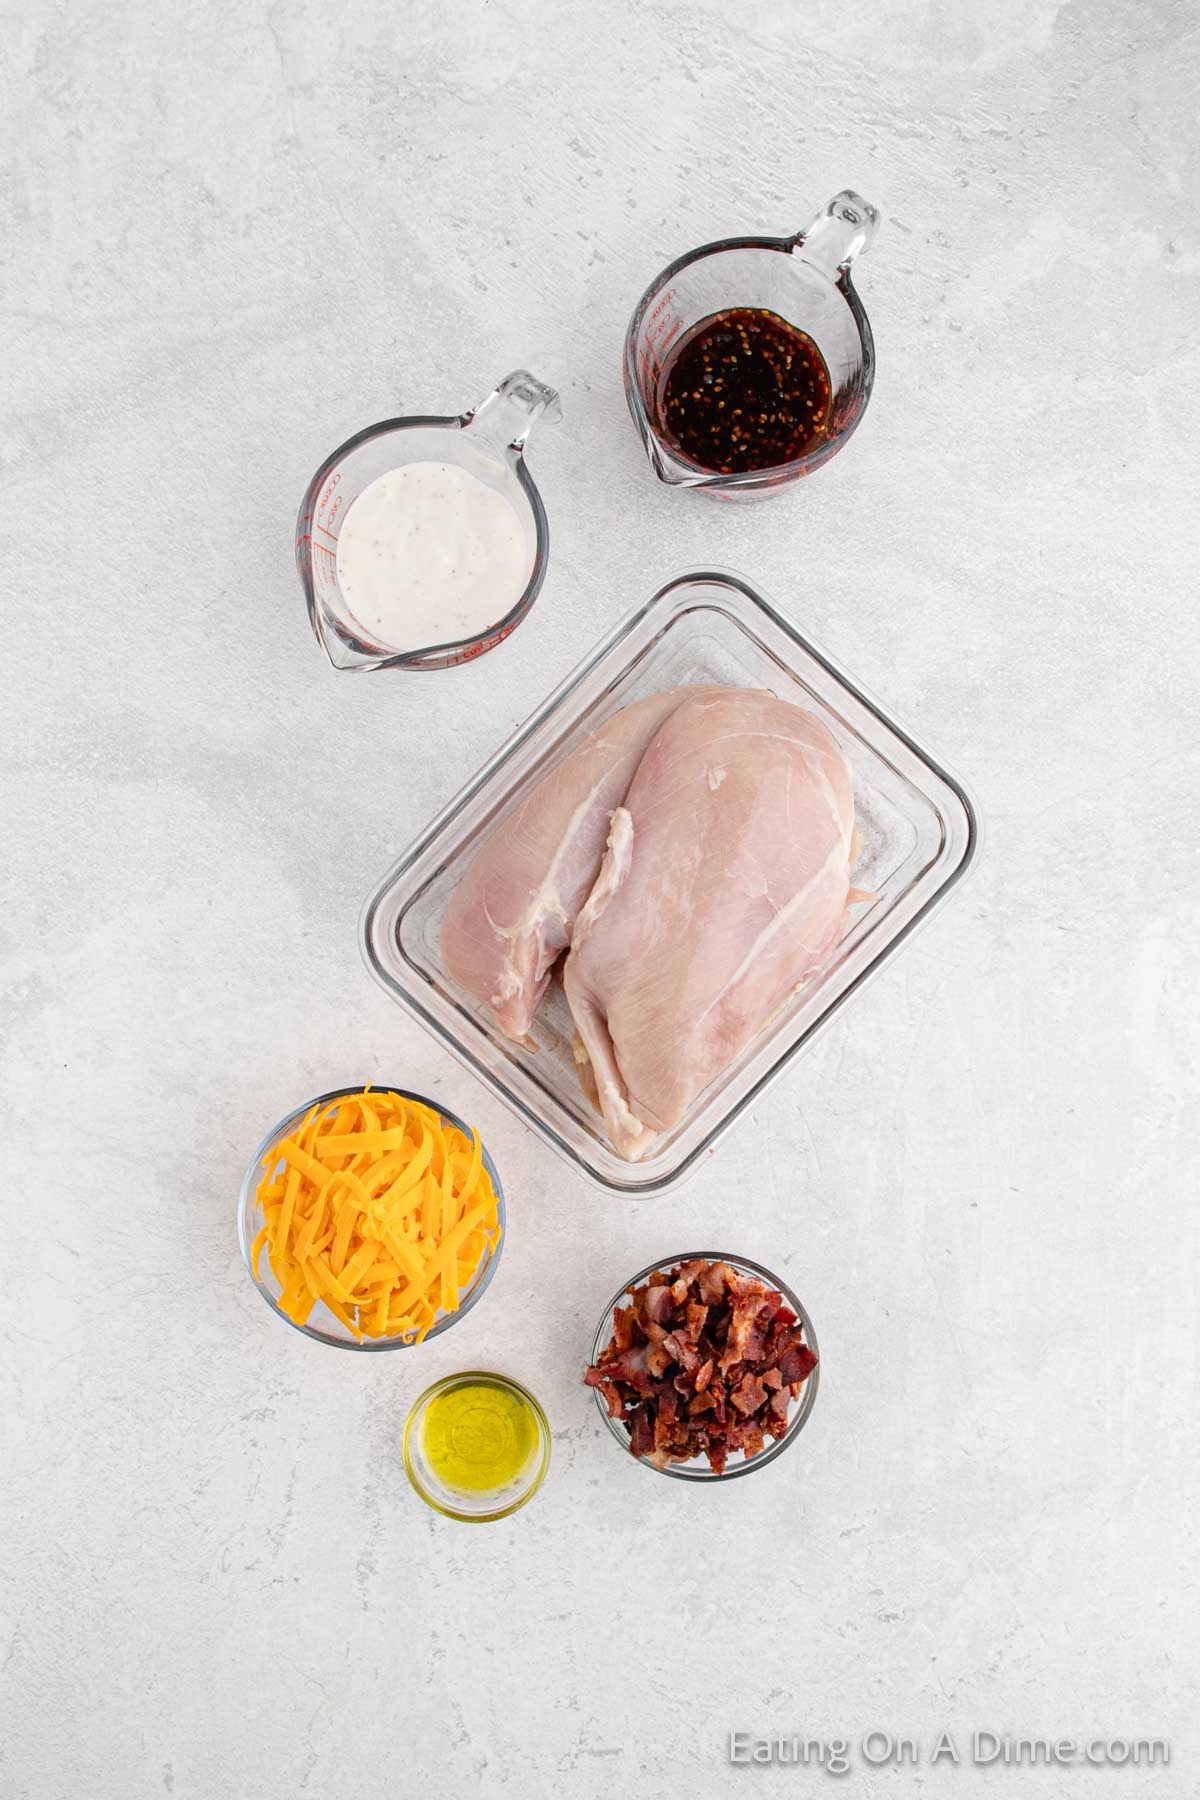 Chicken Bacon Ranch ingredients - olive oil, chicken breasts, bacon, teriyaki sauce, ranch salad dressing, cheese